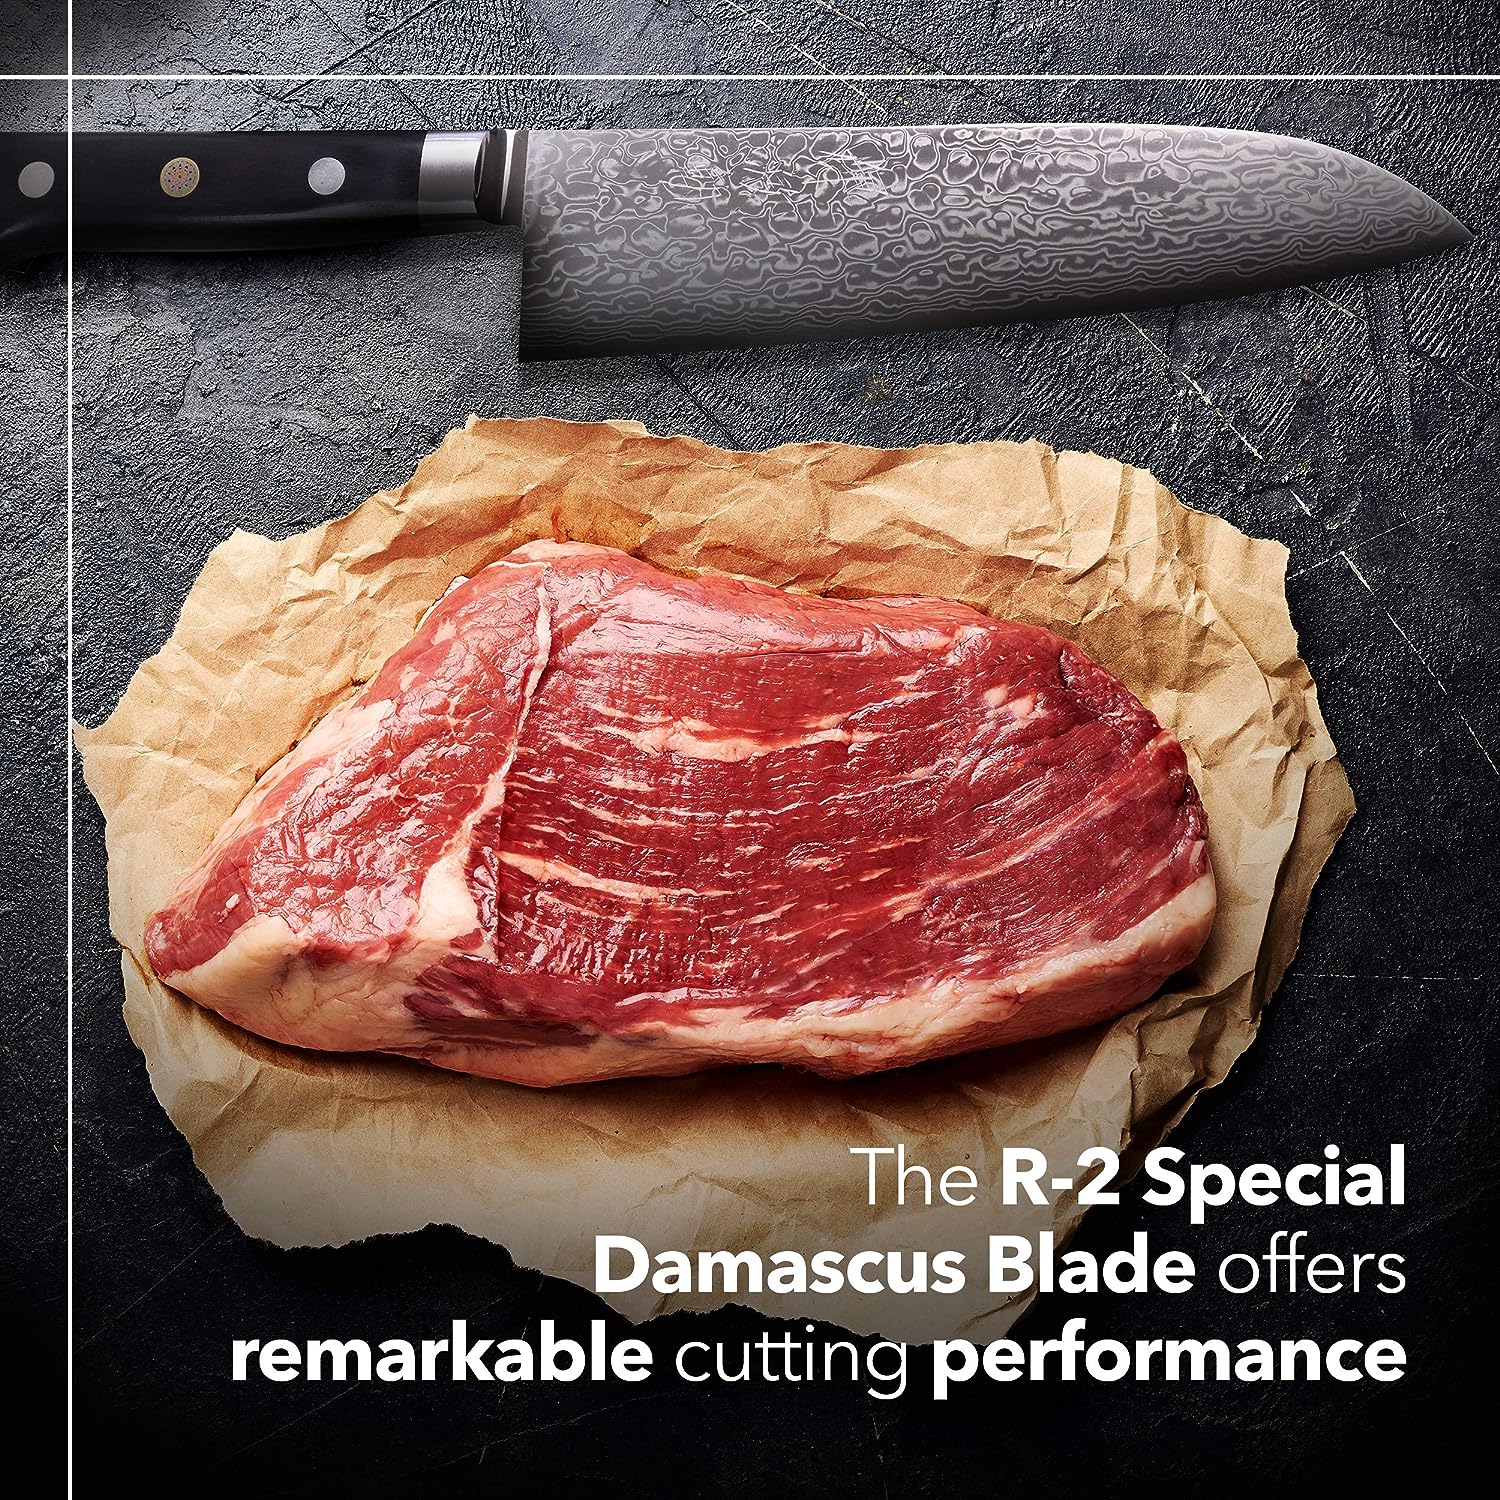 Best Damascus Knives For Serious Home Chef or Culinary Enthusiast